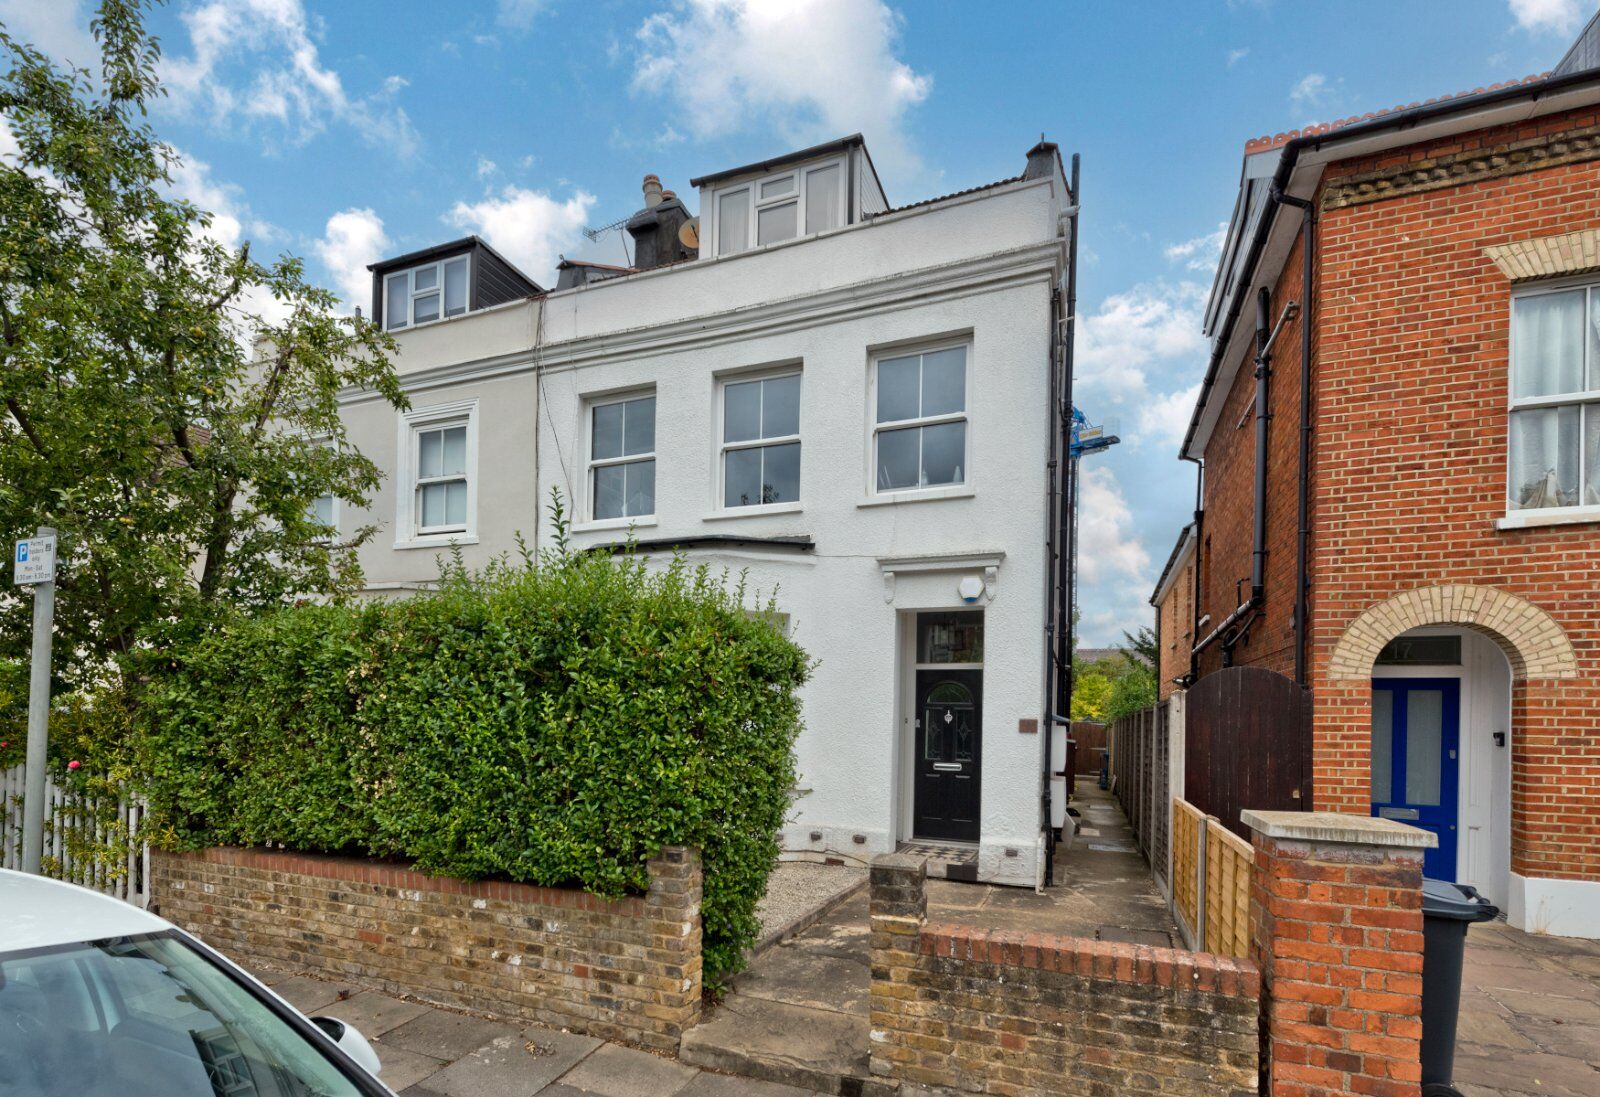 1 bedroom semi detached flat for sale Griffiths Road, London, SW19, main image